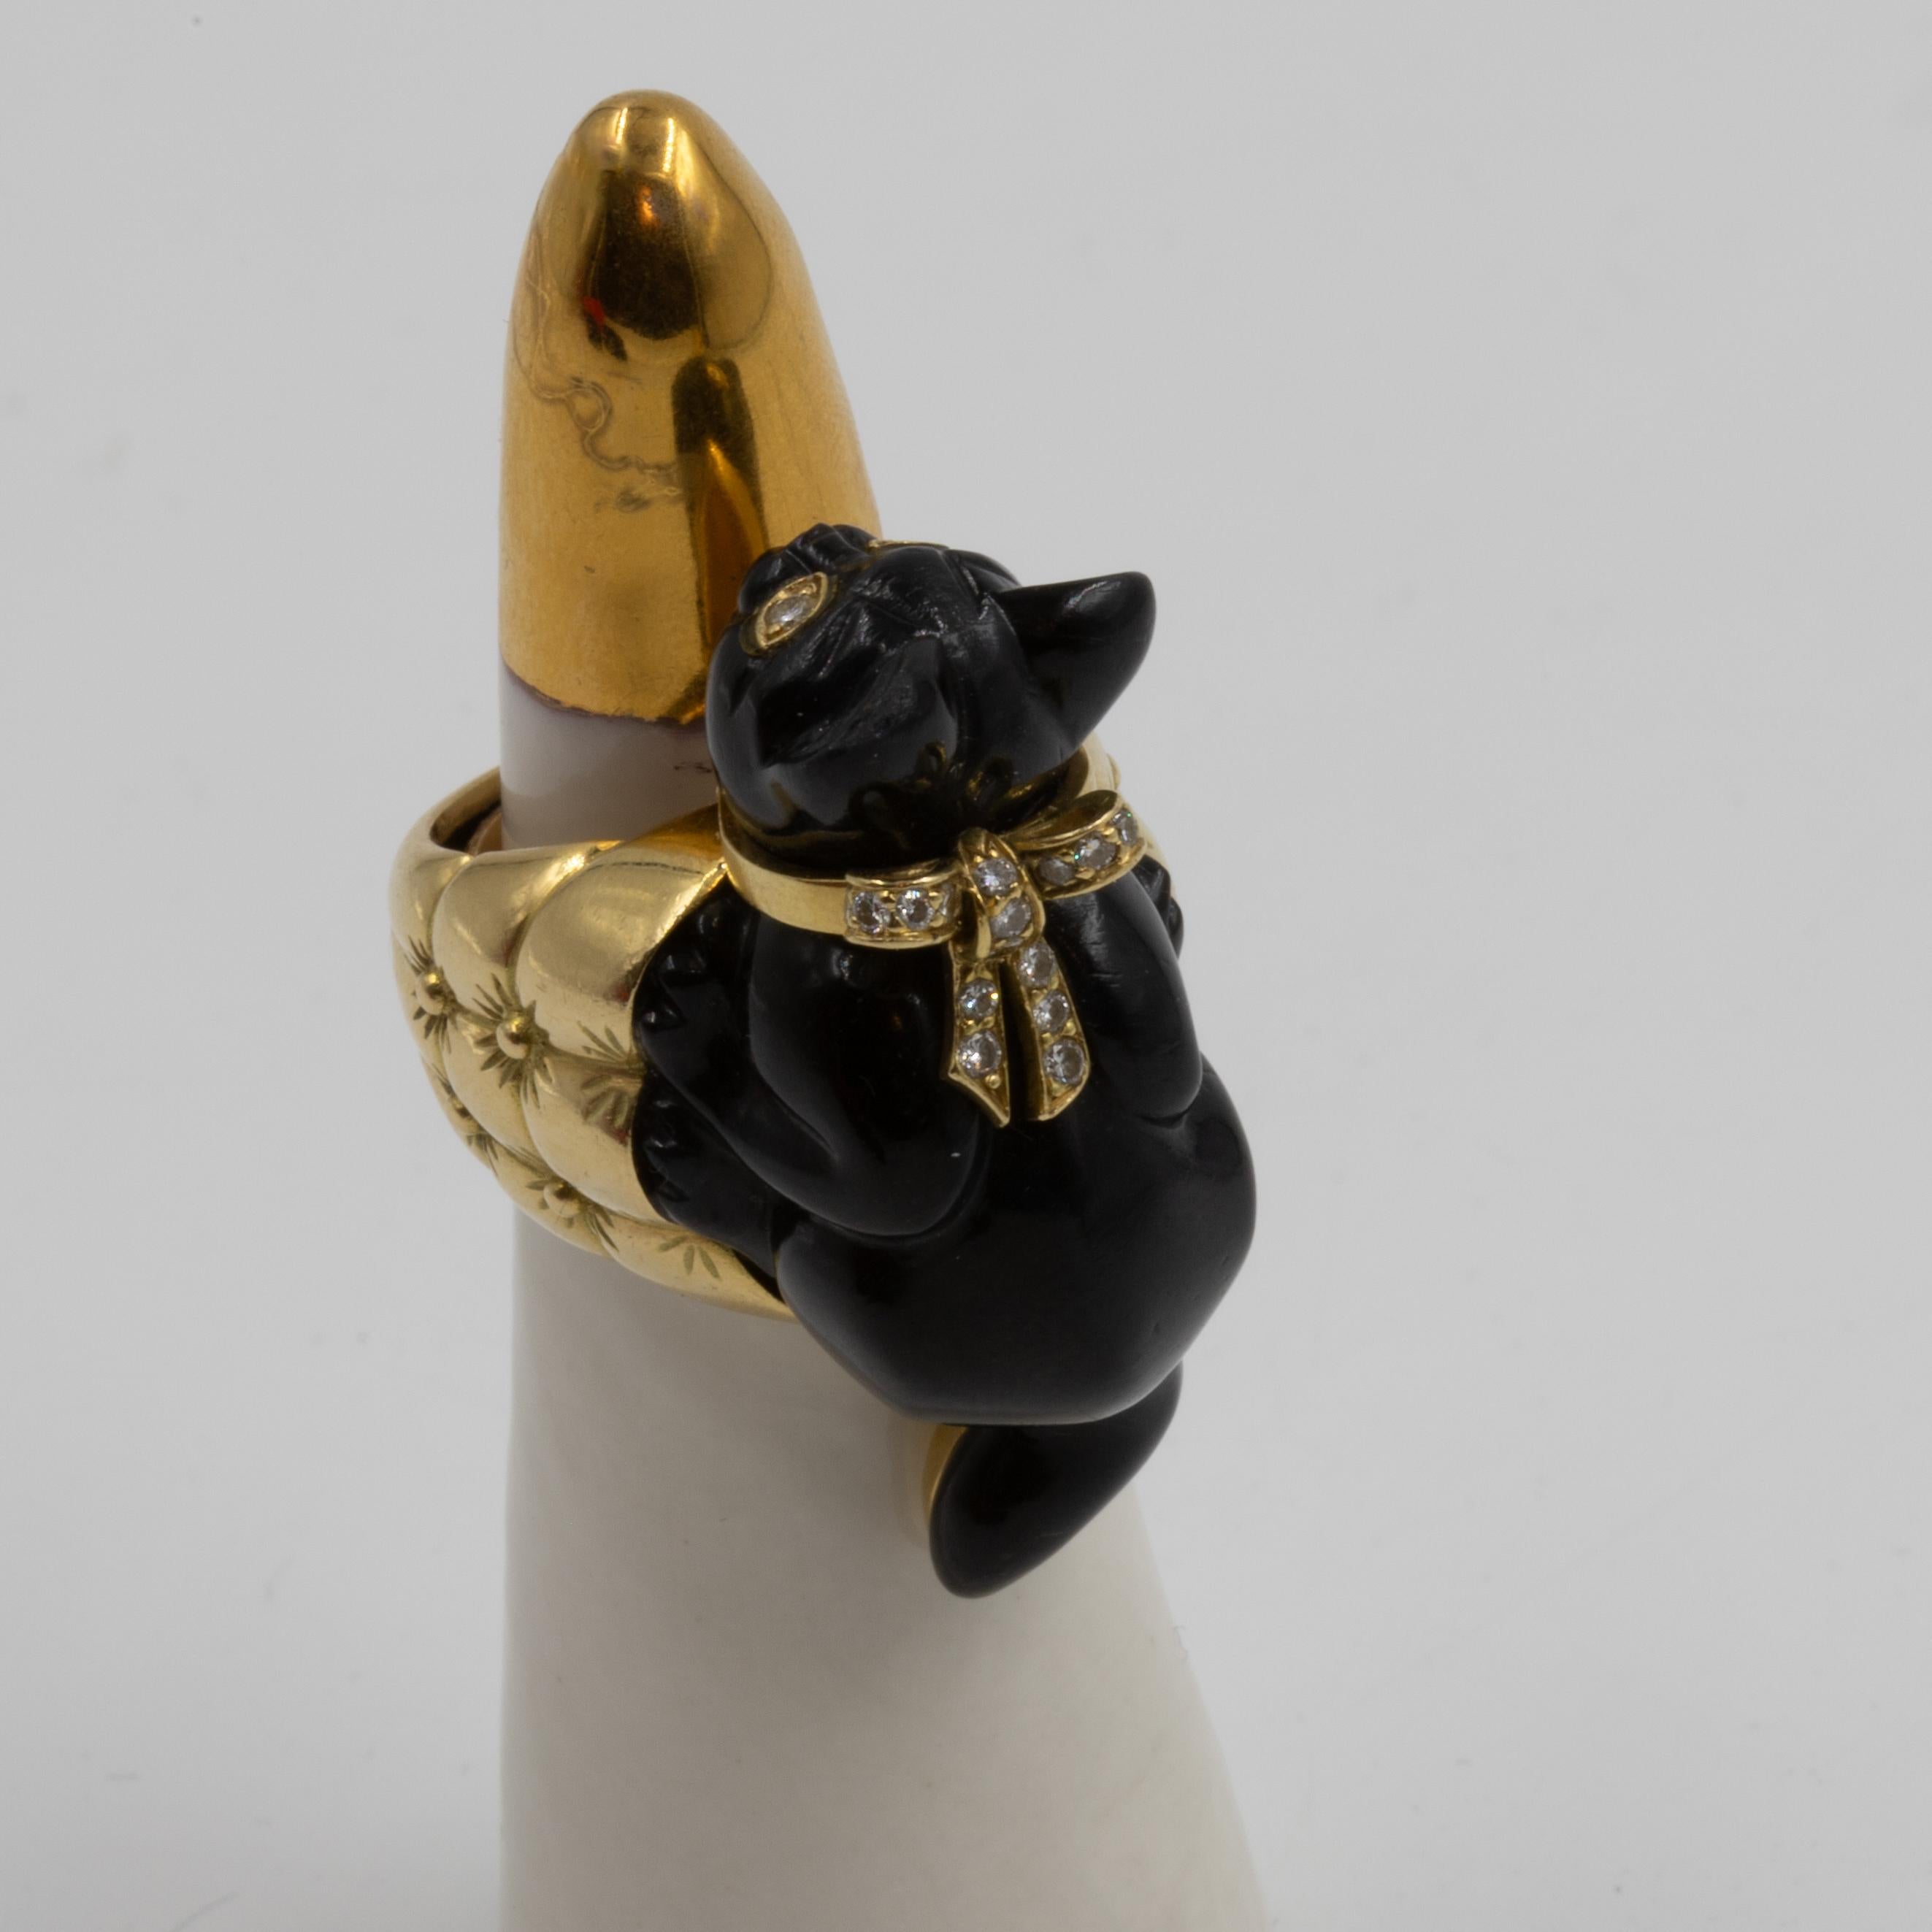 Cat Ring by Eva Segoura at Second Petale Gallery

Yellow gold setting, depicting a cat on its cushion, body of the cat in onyx cut in the round. Eyes and ribbon paved with diamonds. Signed Eva Segoura inside the  ring.     

Dimensions : W22 x L43 x